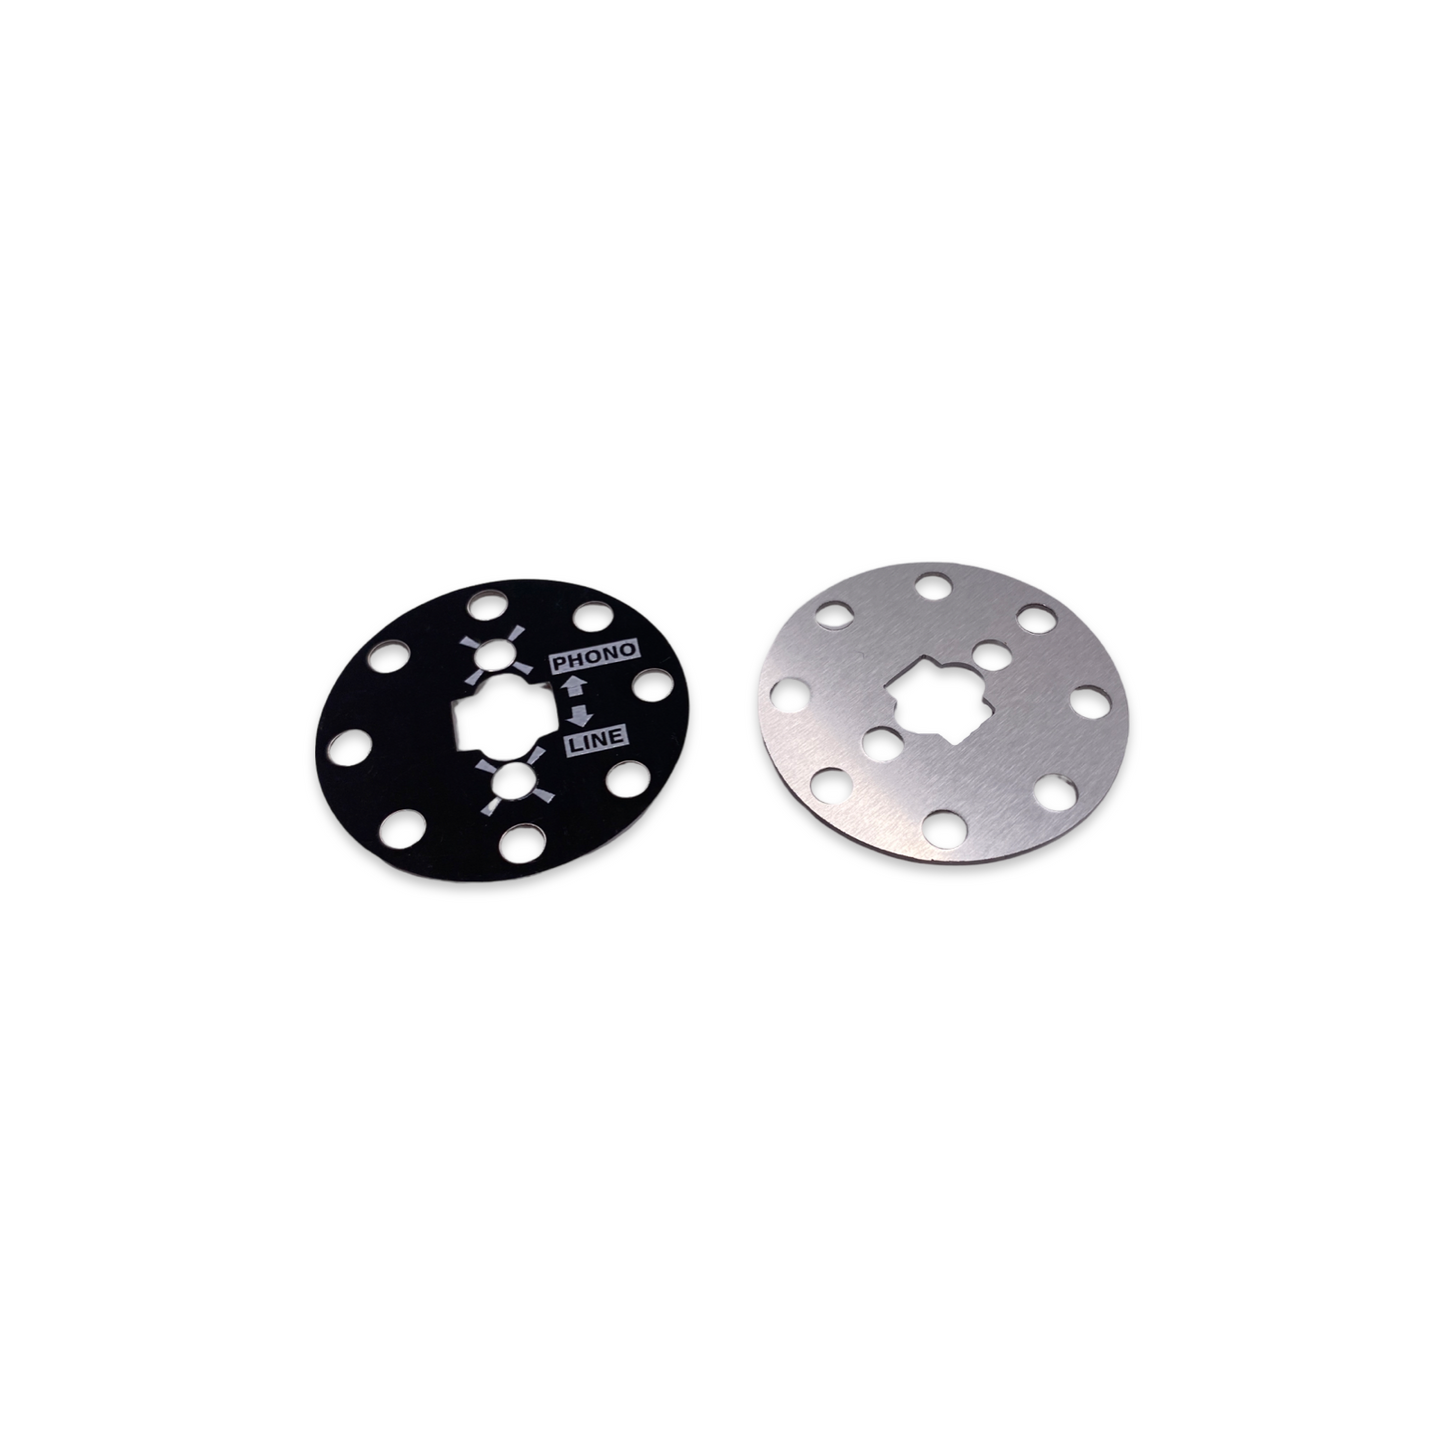 Vestax Input Toggle Switch Mounting Plates Pair